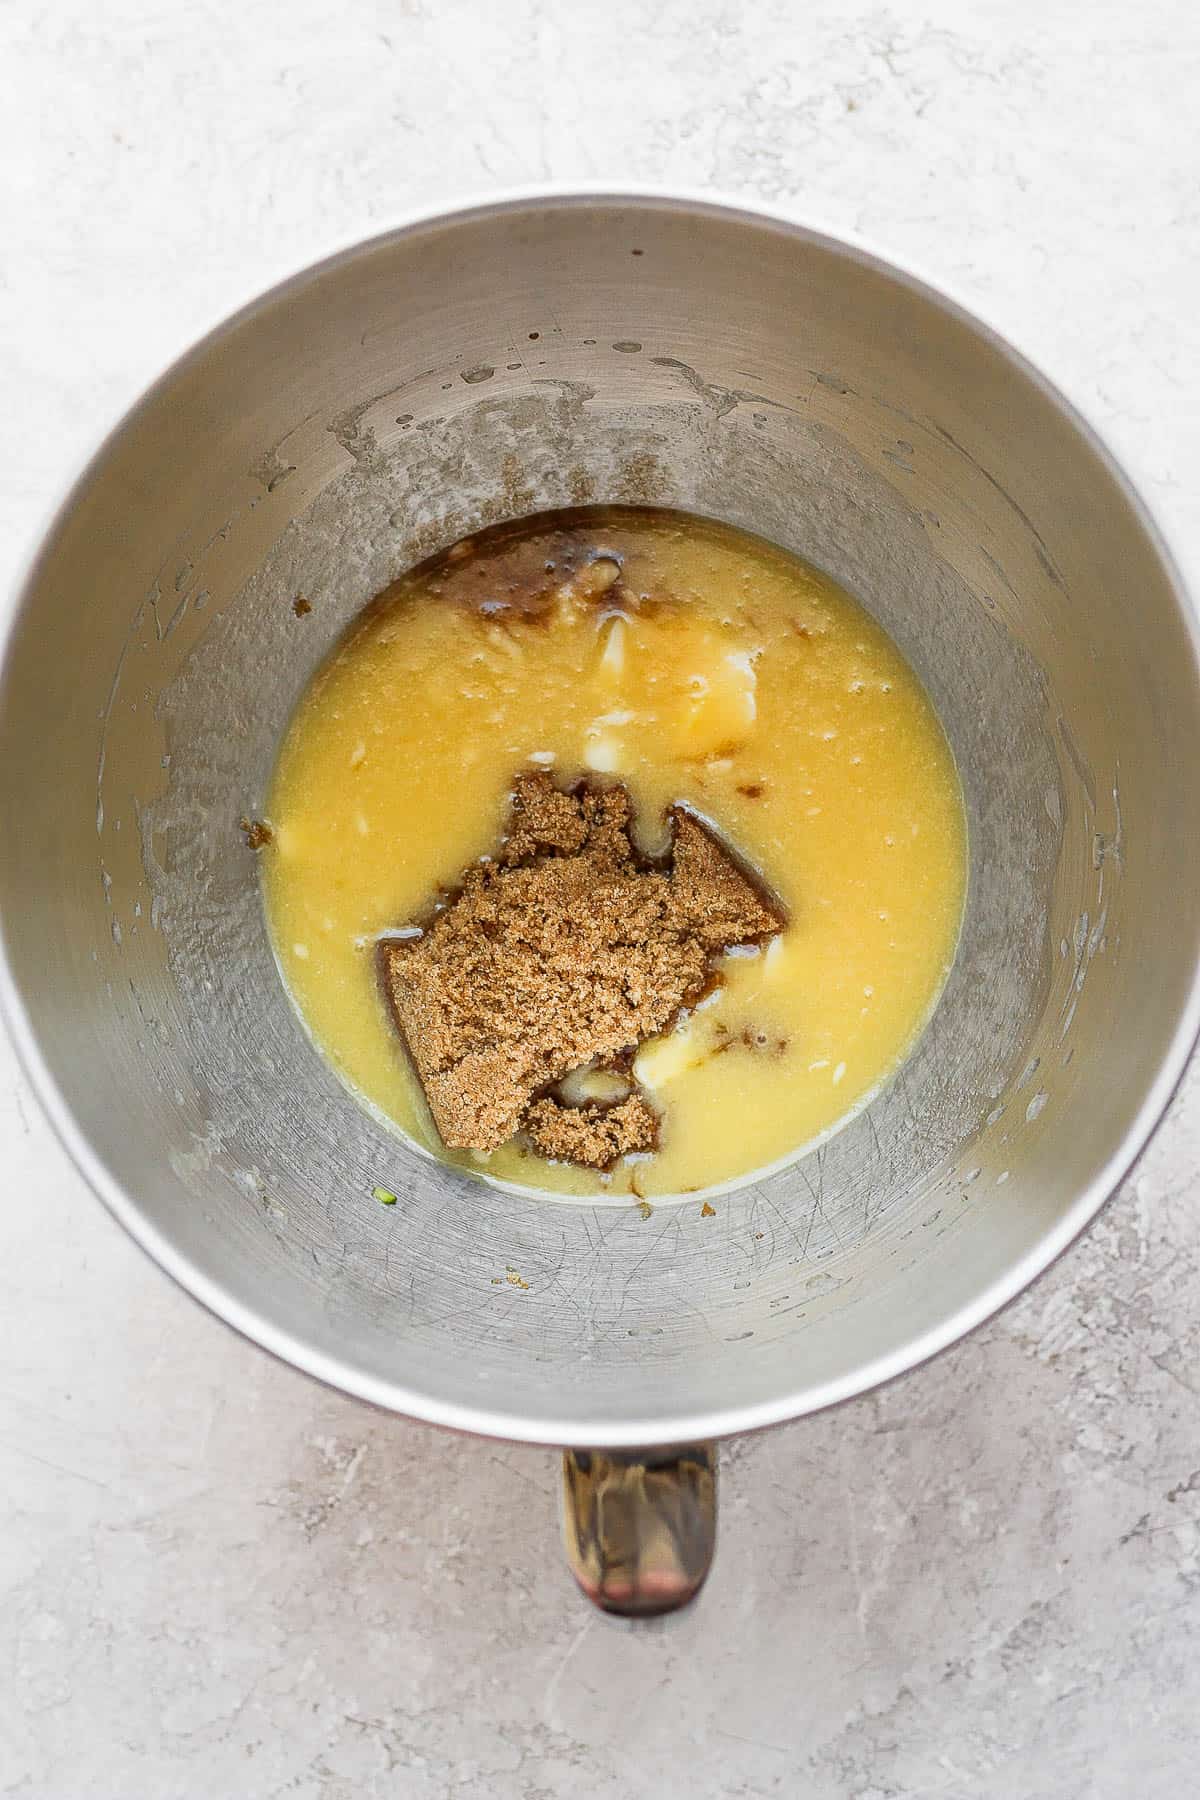 Eggs, melted butter, brown sugar, and vanilla extract in a stand mixing bowl.